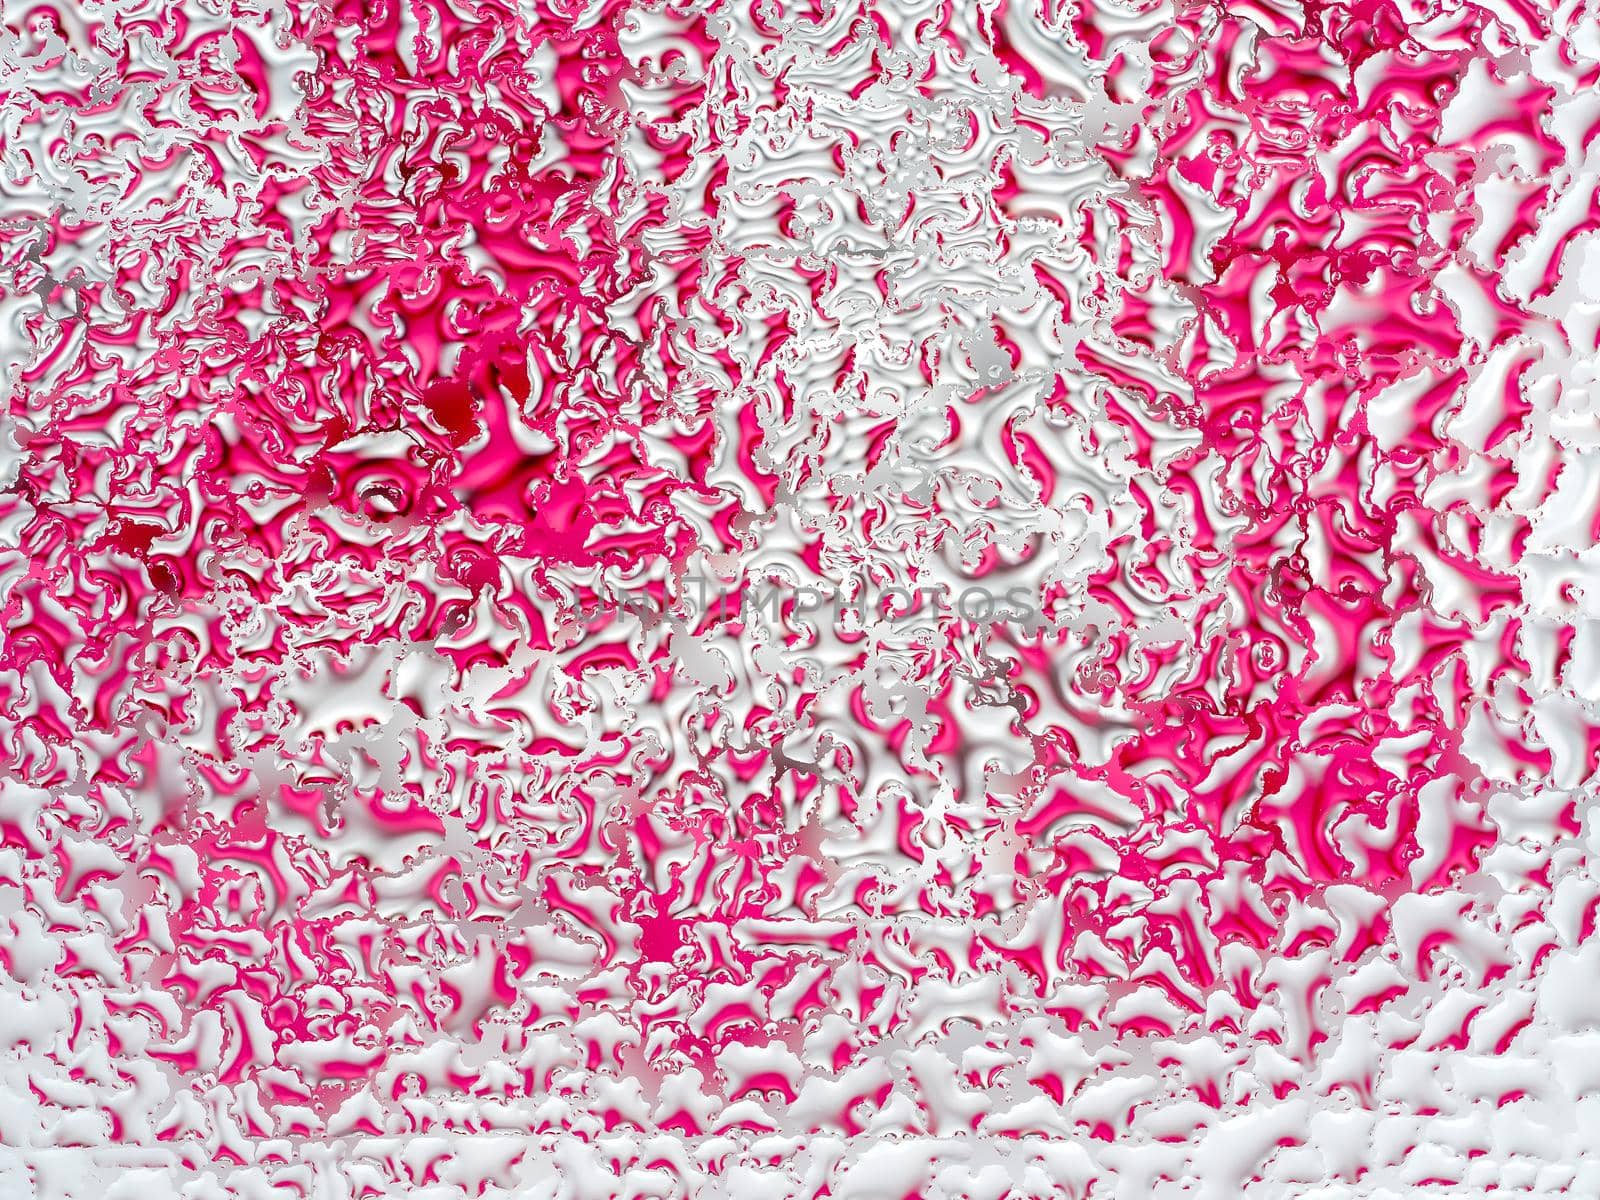 Abstract pink and white background with large and small convex drops of water on glass, condensation on window. Macro, close up. by NataBene